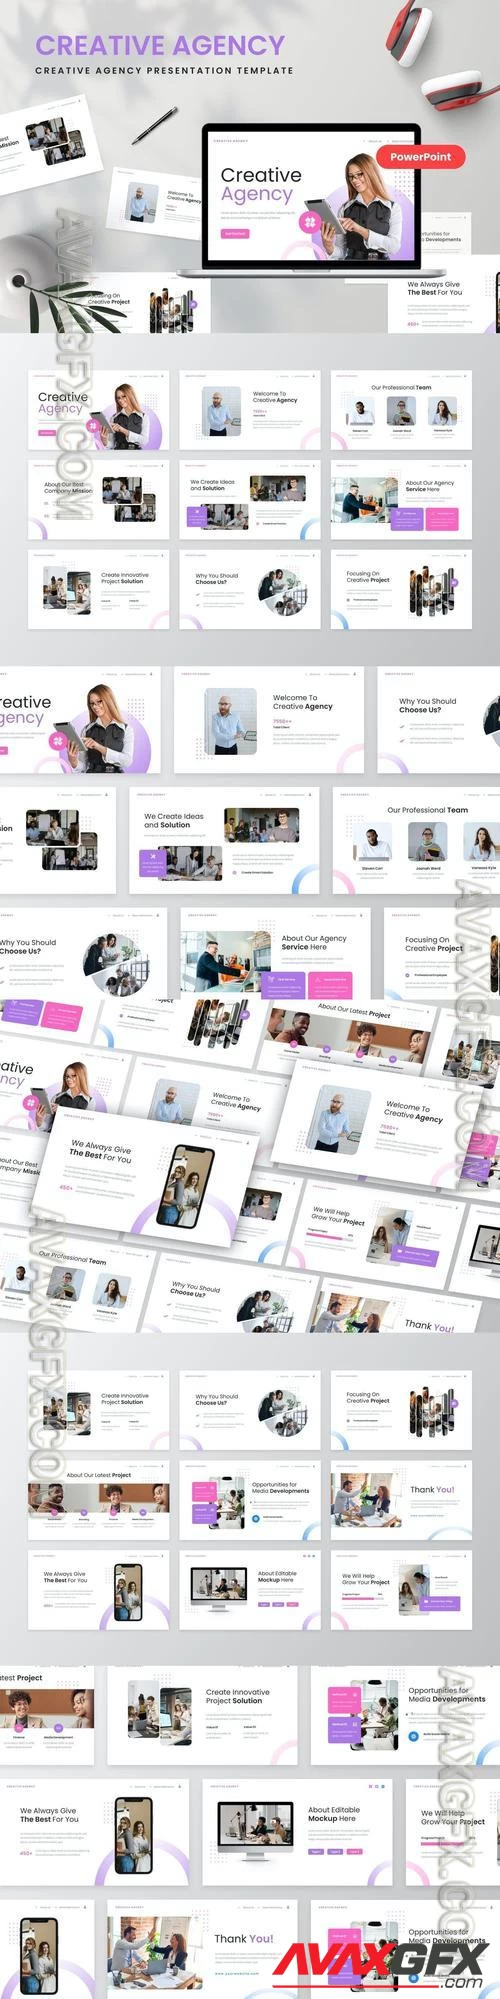 Creative Agency PowerPoint Template